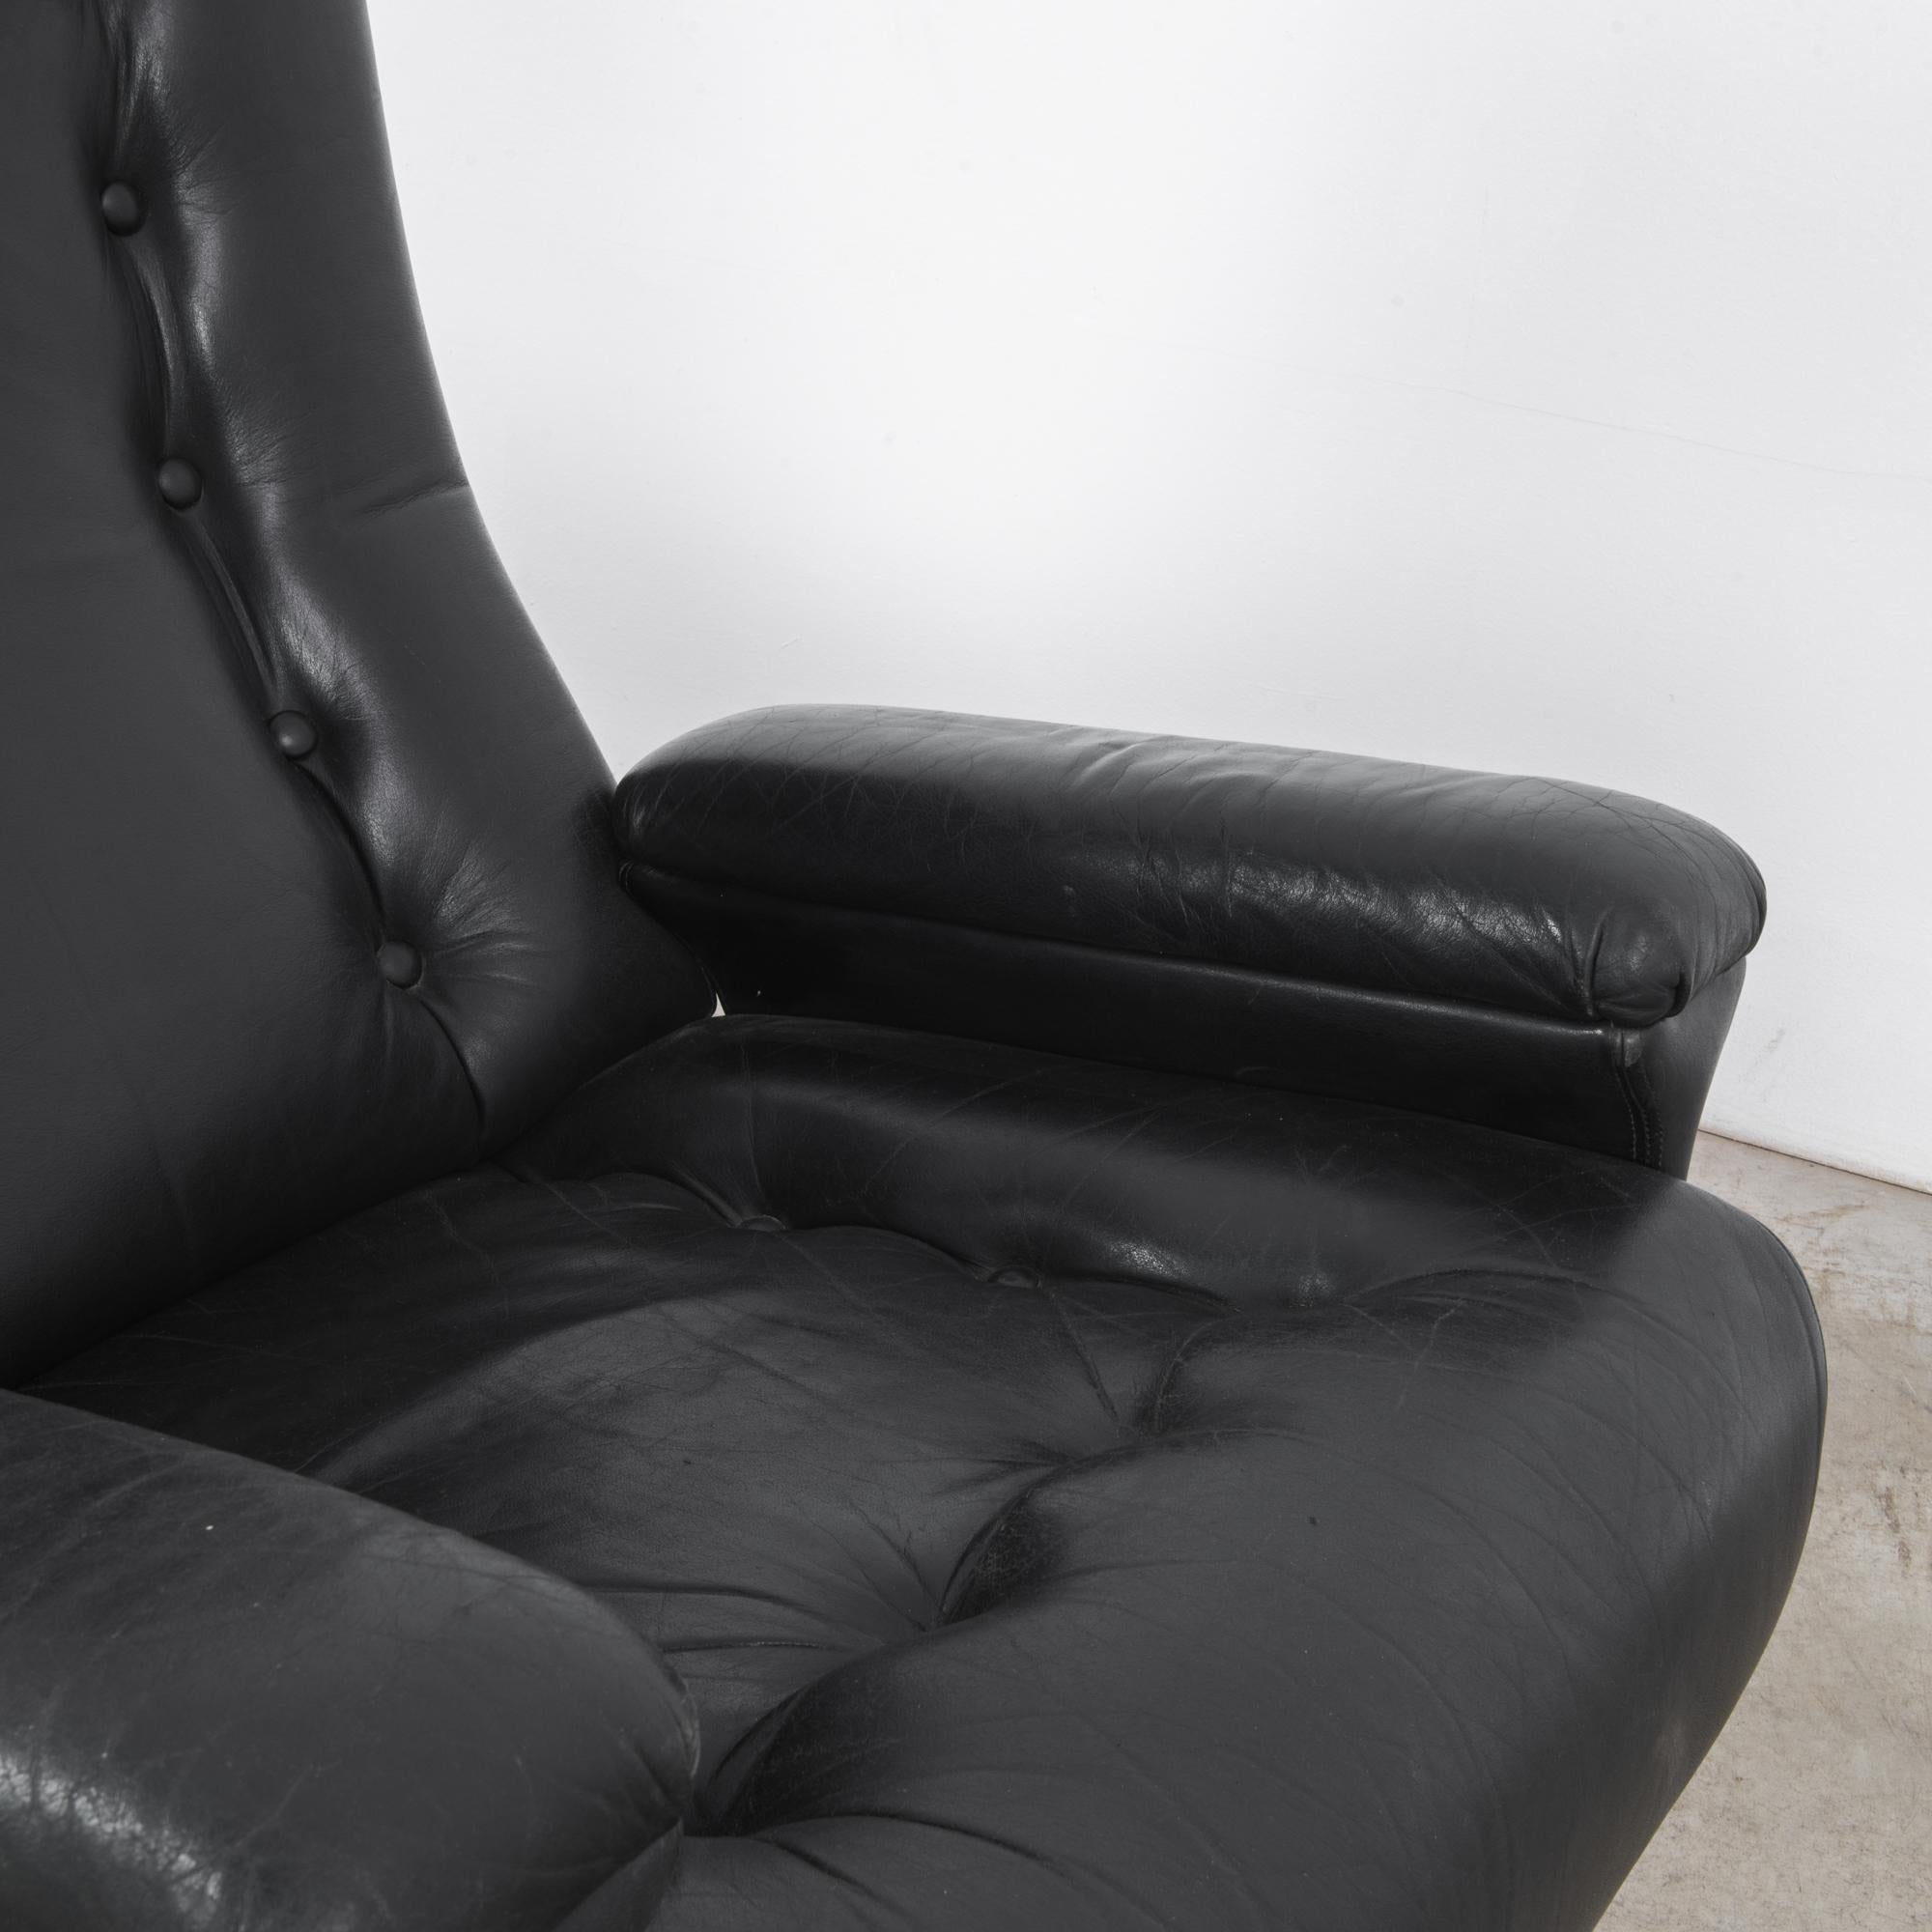 A pair of black leather armchairs from Denmark, produced circa 1960. A plush pair of midcentury loungers standing on five feet in rich black leather framed by wood panel side supports. Their assertive profiles make them perfect as comfortable accent